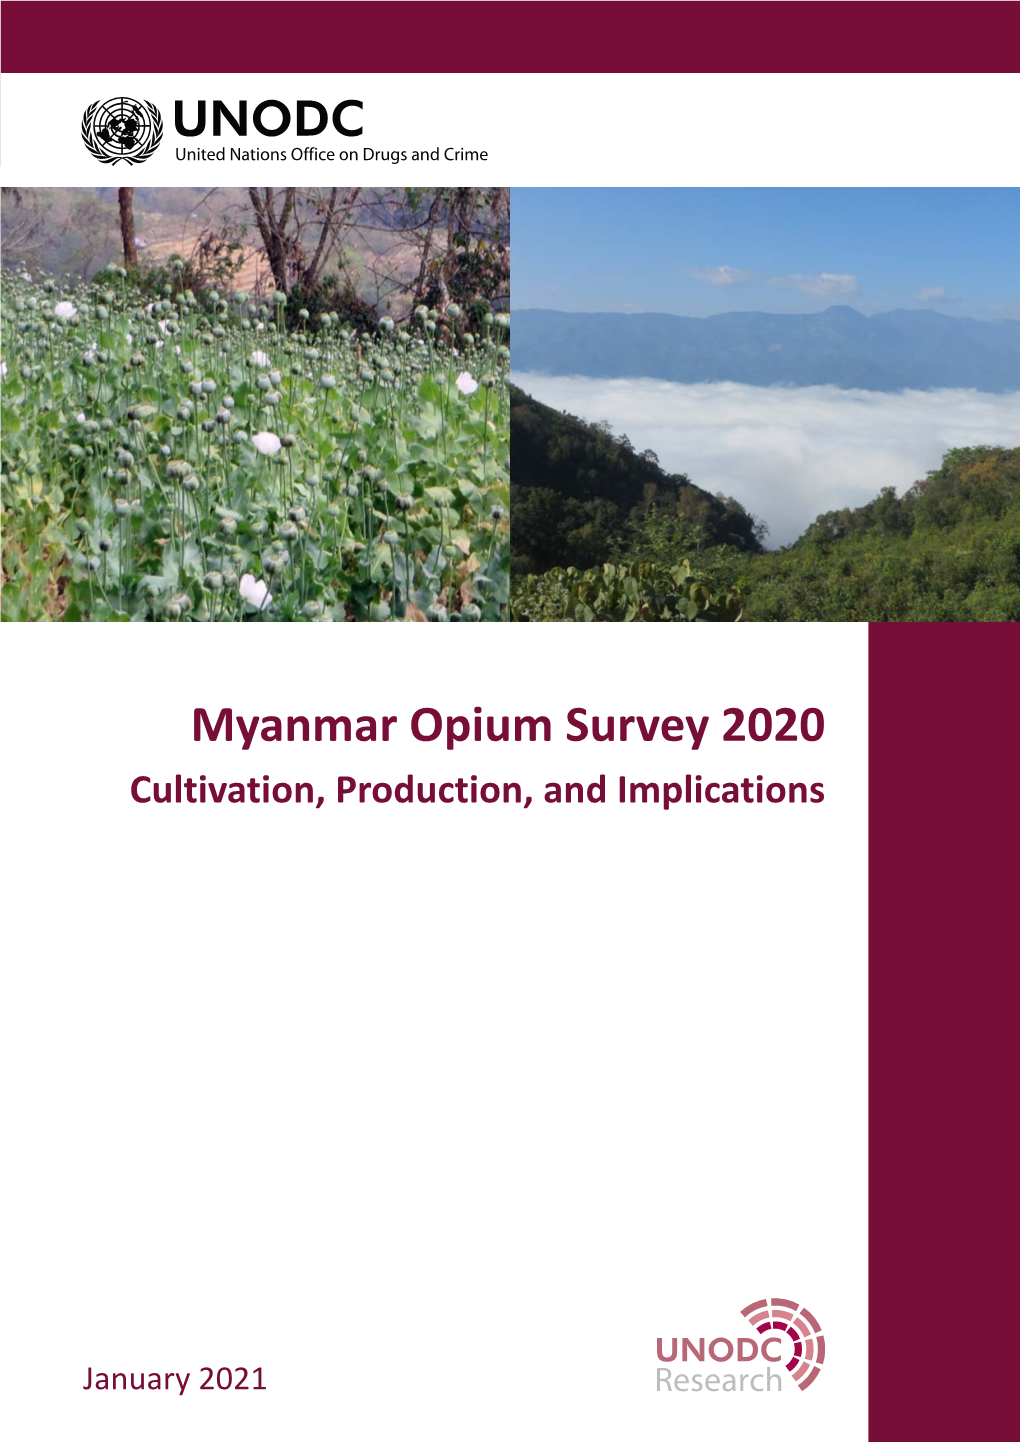 Myanmar Opium Survey 2020 Cultivation, Production, and Implications